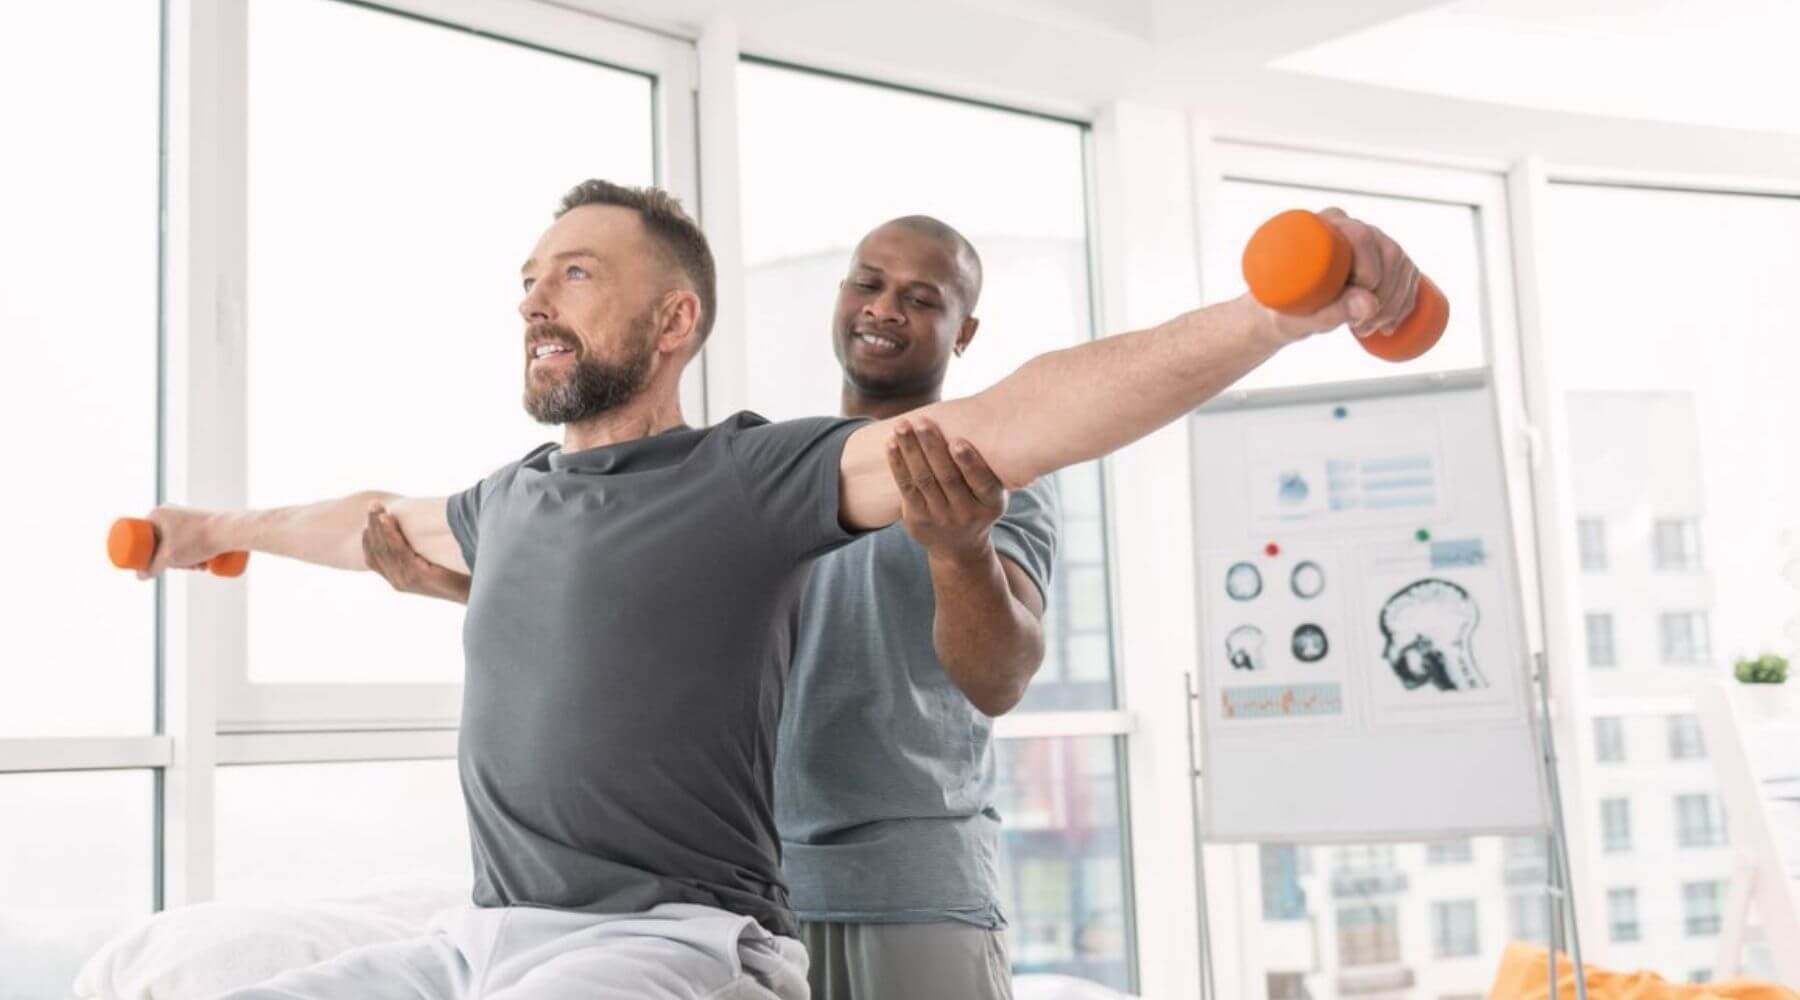 Patient holding weights long right aligned